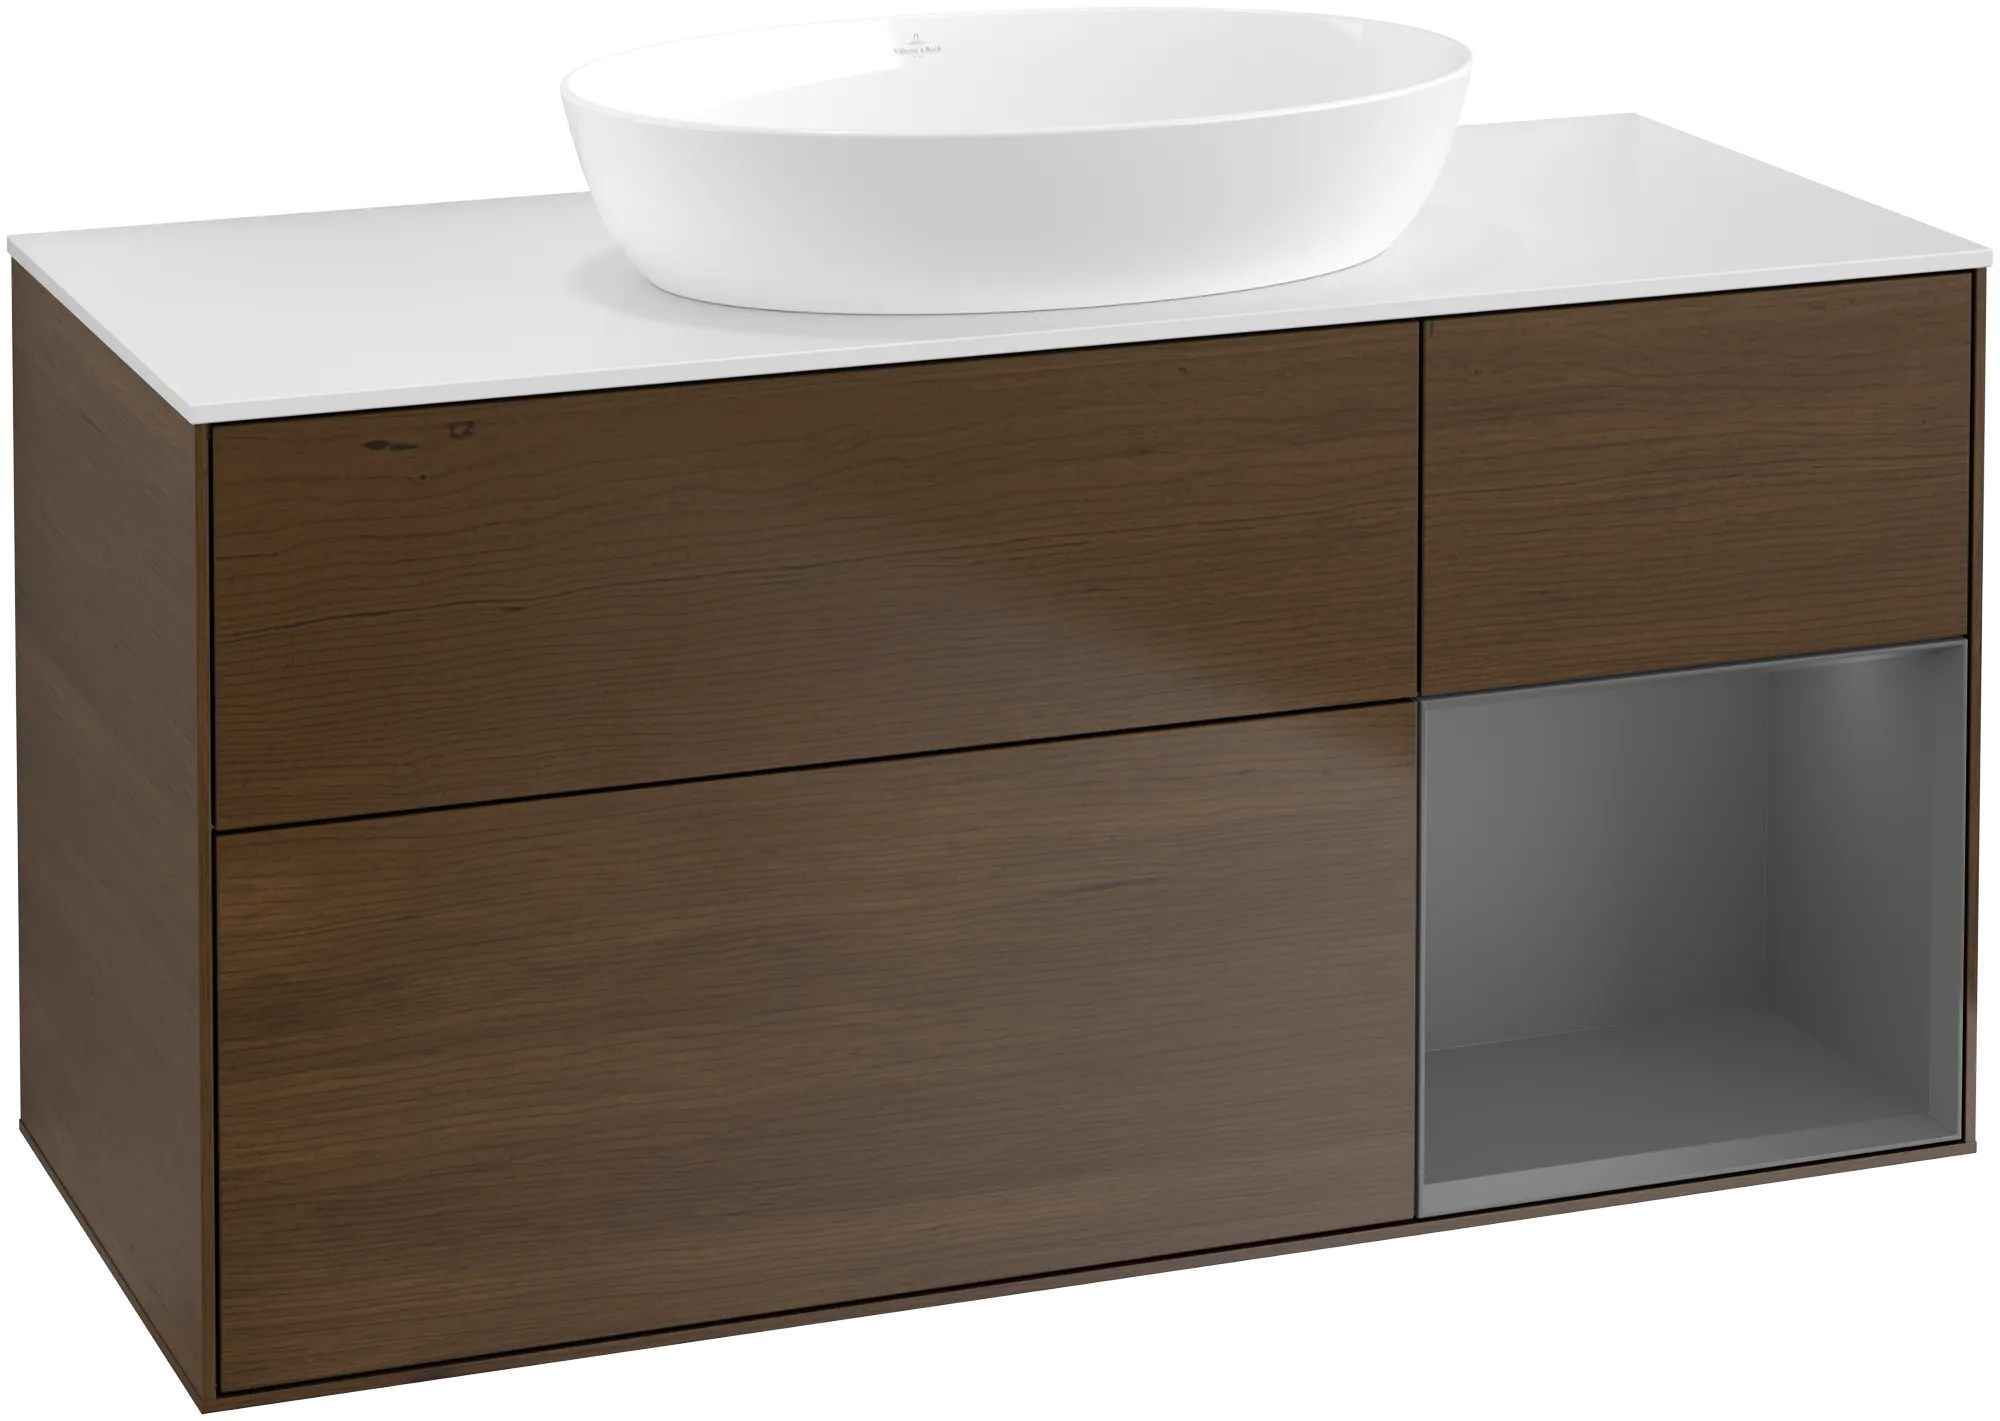 VILLEROY BOCH Finion Vanity unit, with lighting, 3 pull-out compartments, 1200 x 603 x 501 mm, Walnut Veneer / Anthracite Matt Lacquer / Glass White Matt #FA71GKGN resmi